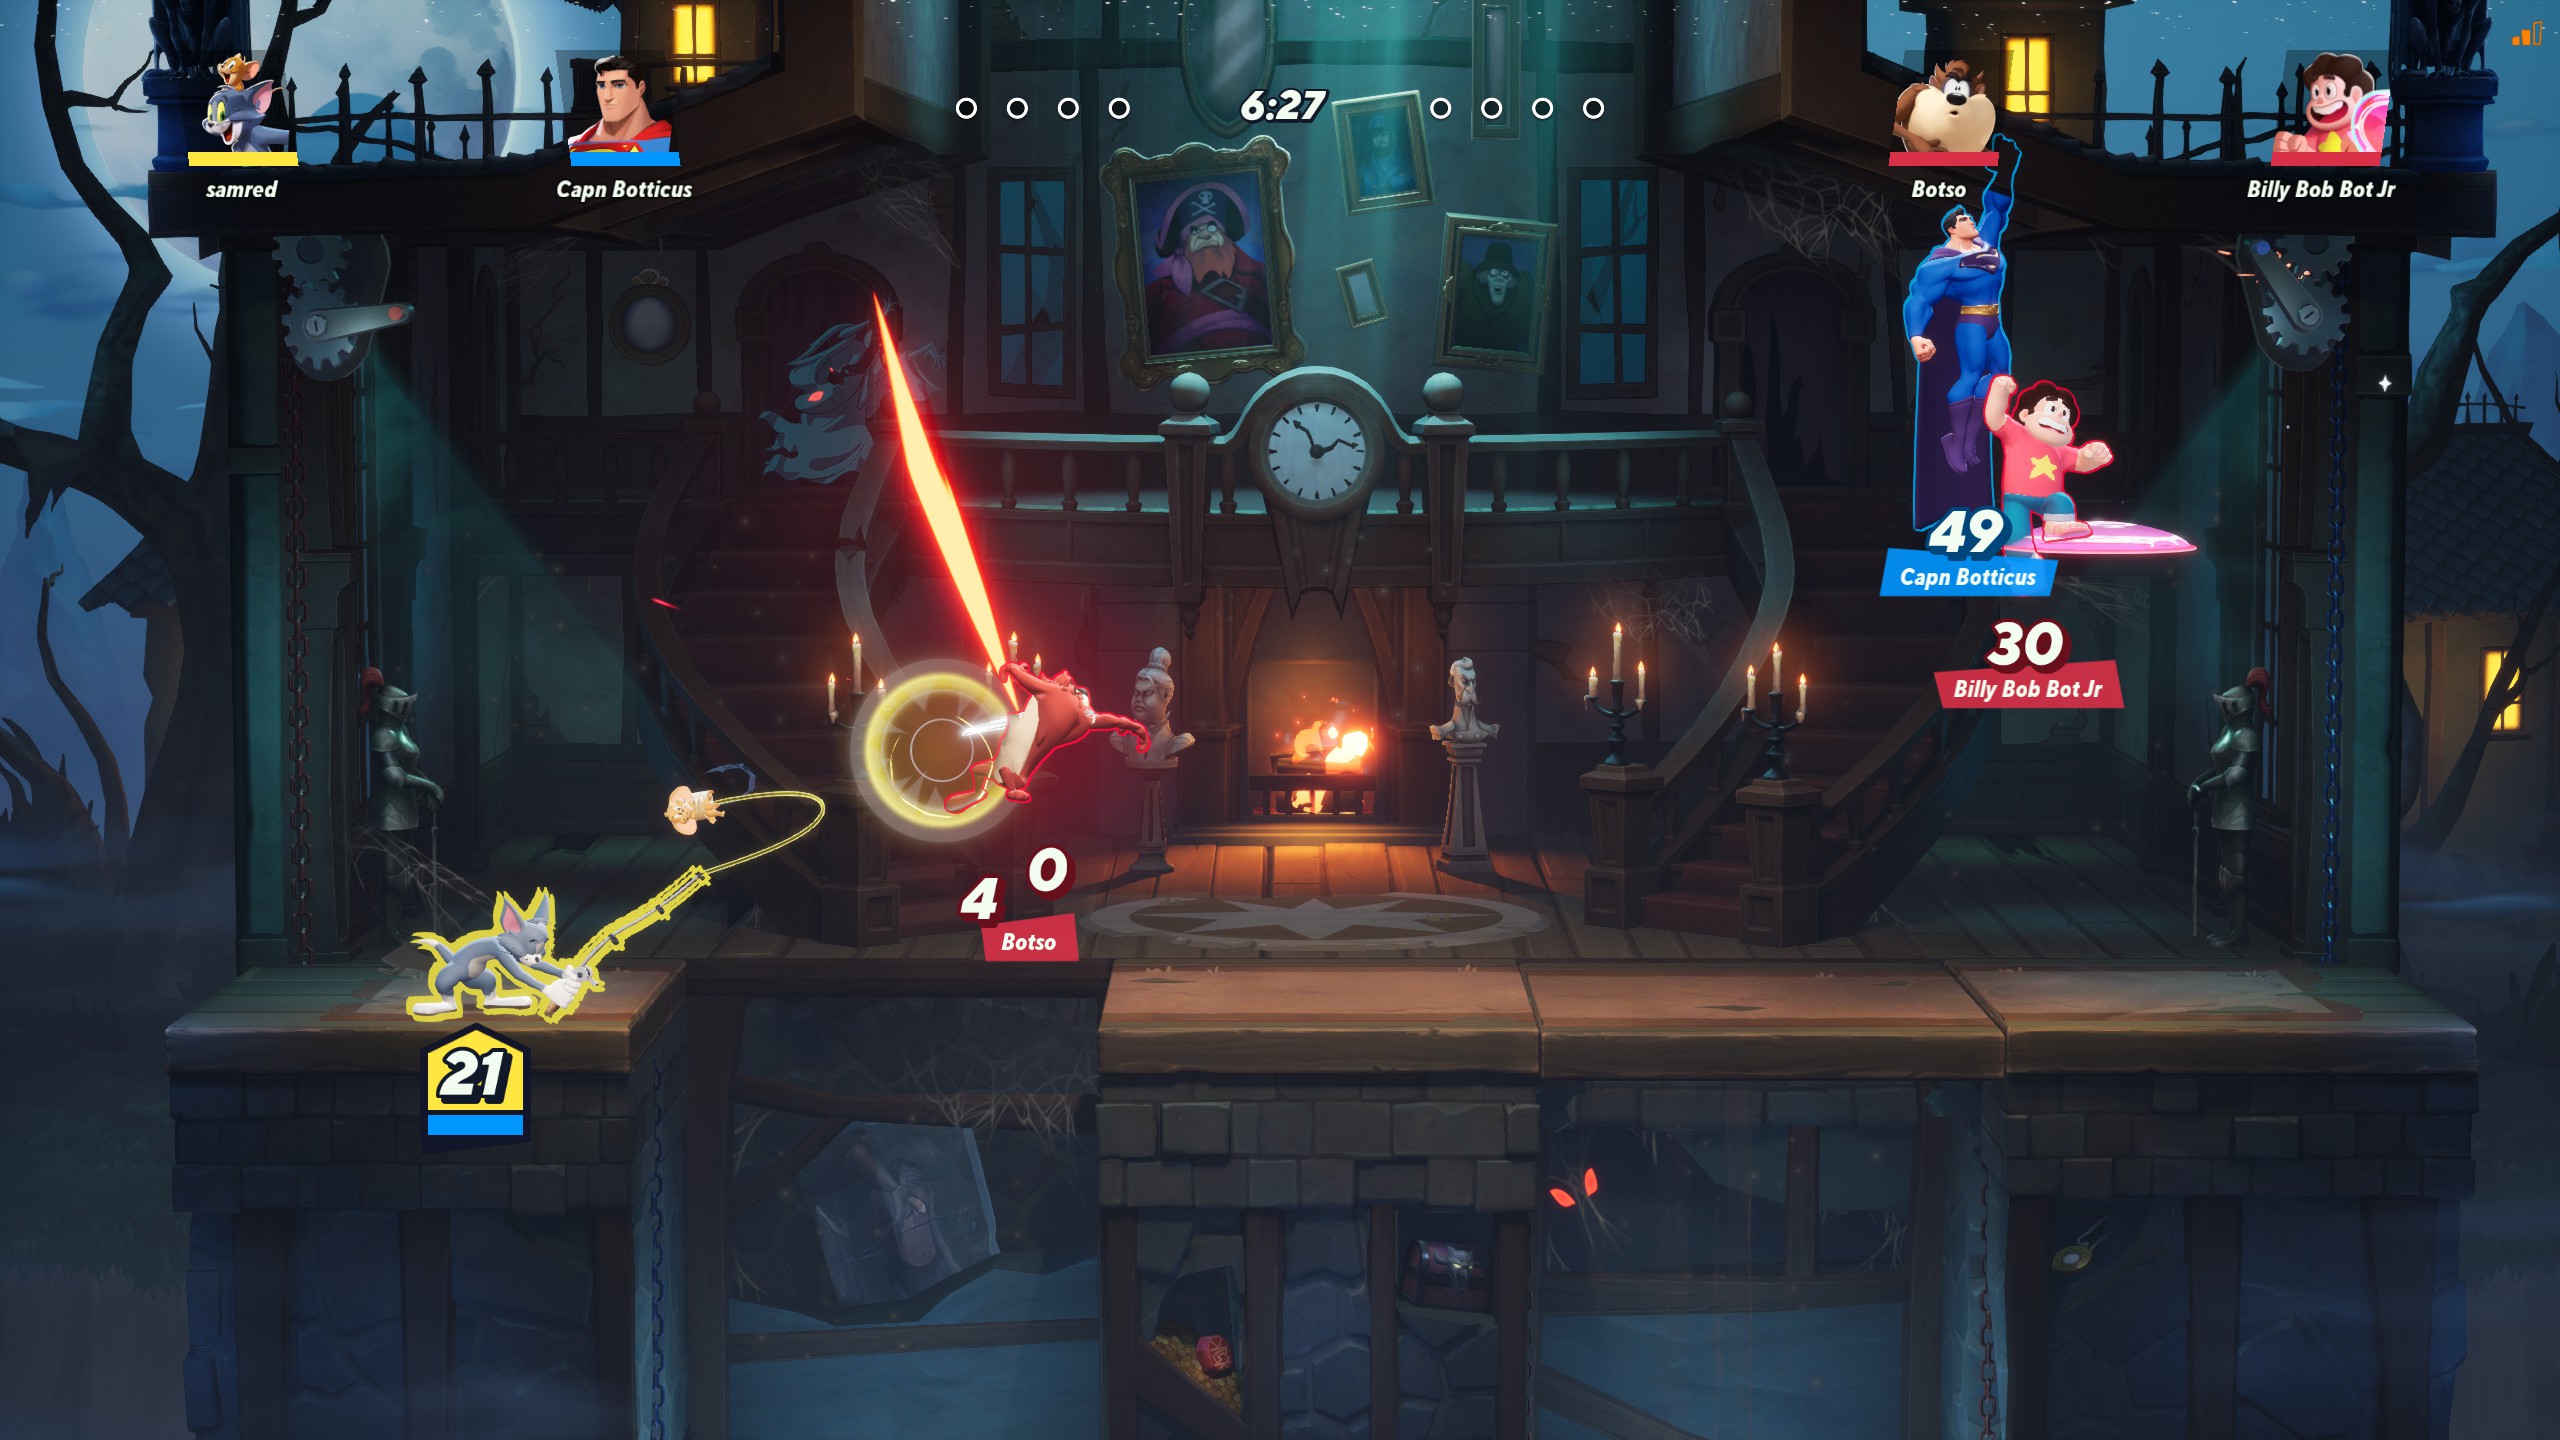 Multiversus hands-on: Finally, a compelling Smash Bros. clone